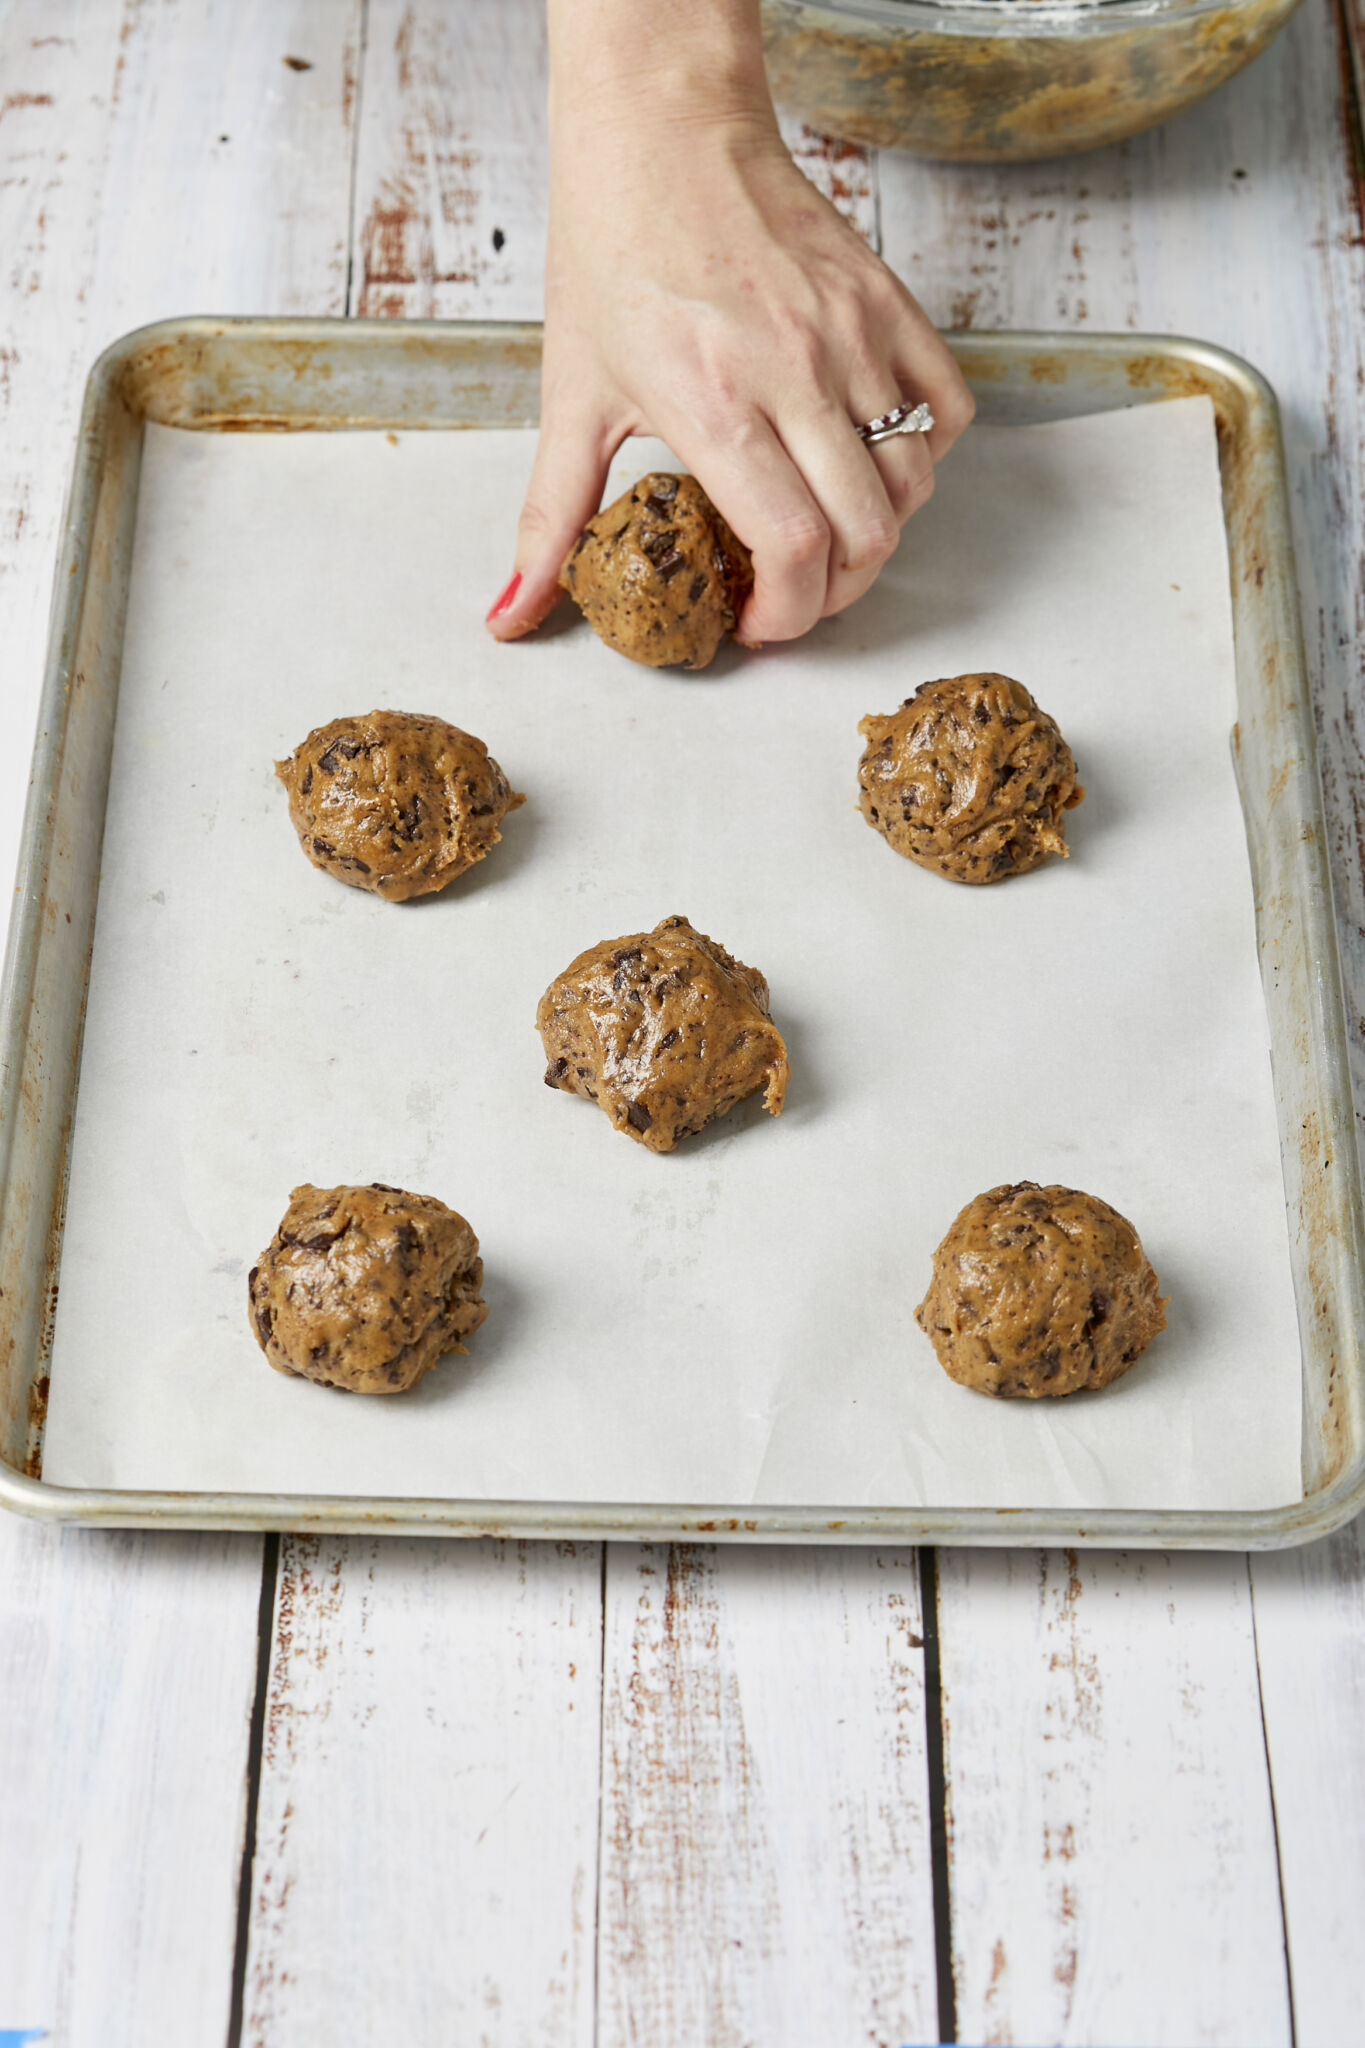 Before baking, placing scooped cookie dough balls 2-3 inches apart on the parchment-lined baking tray. 